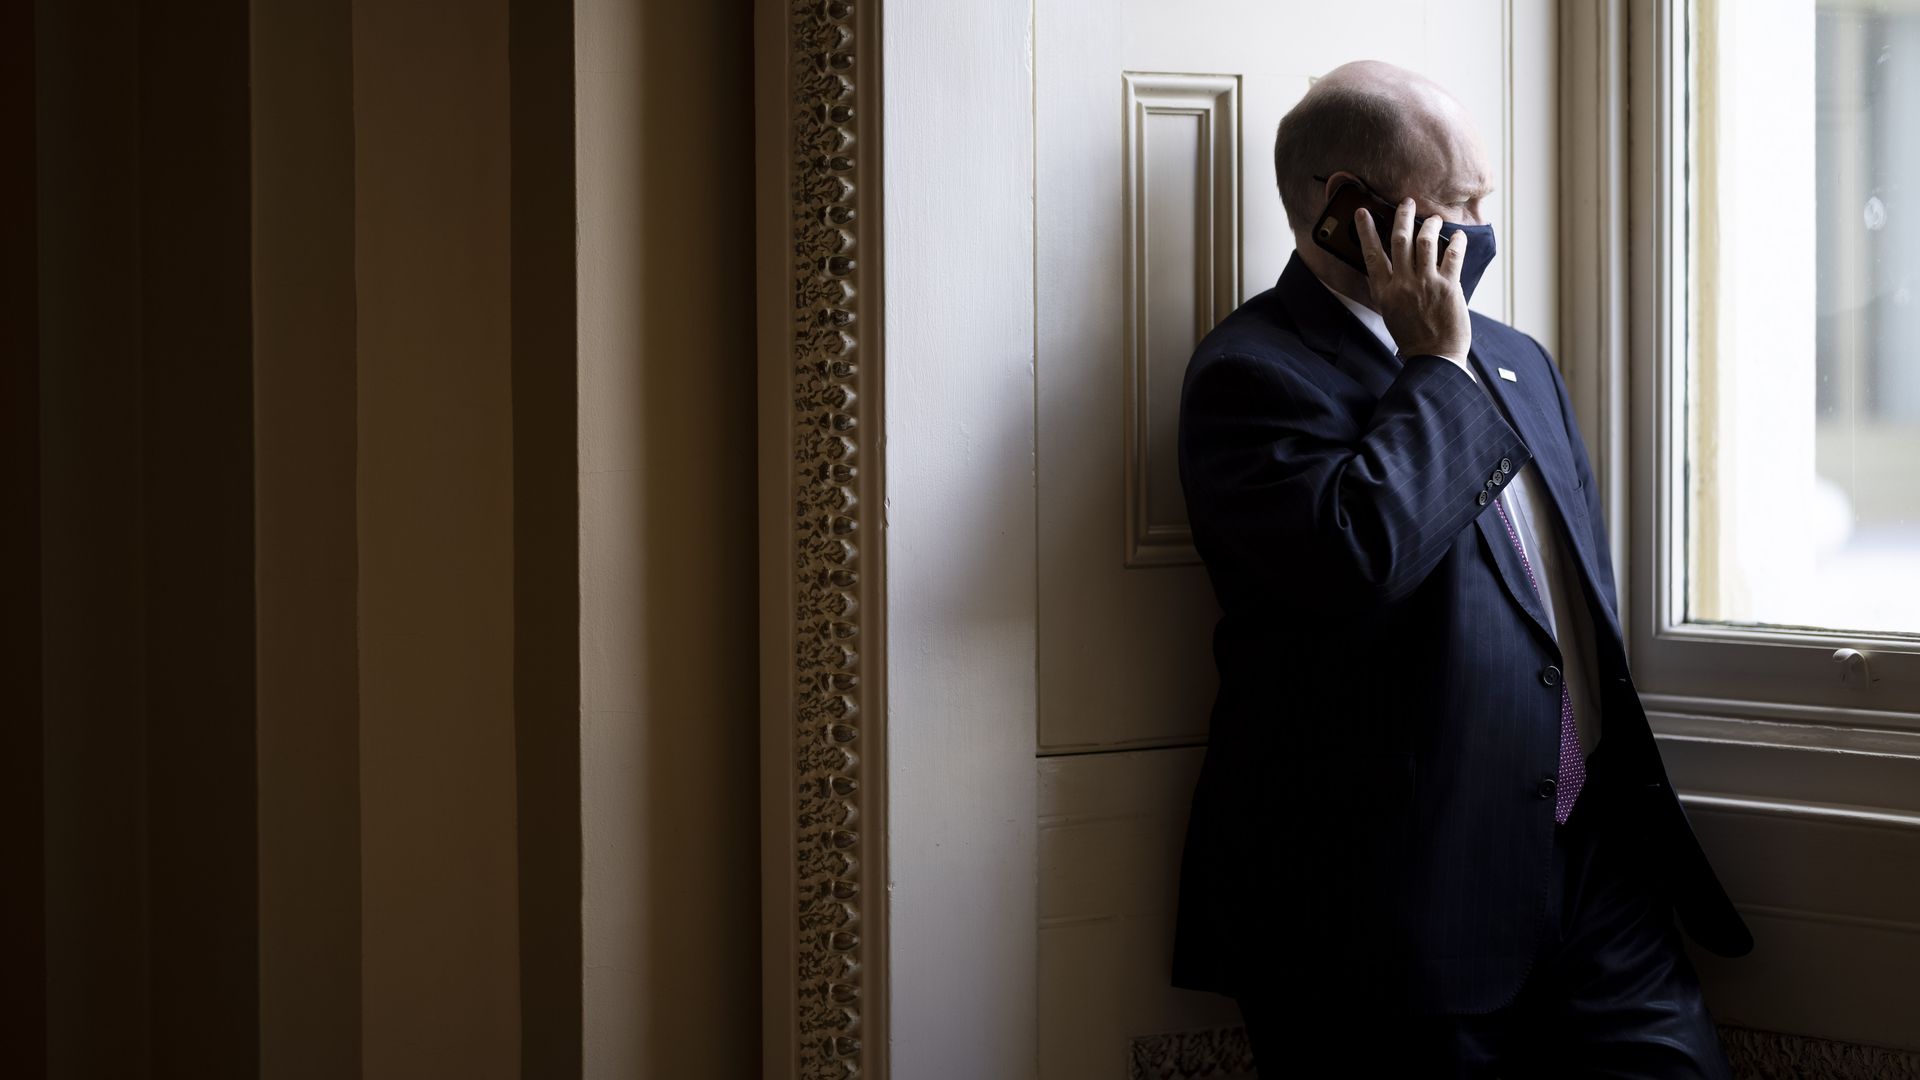 Sen. Chris Coons is seen looking out a window in the Capitol.